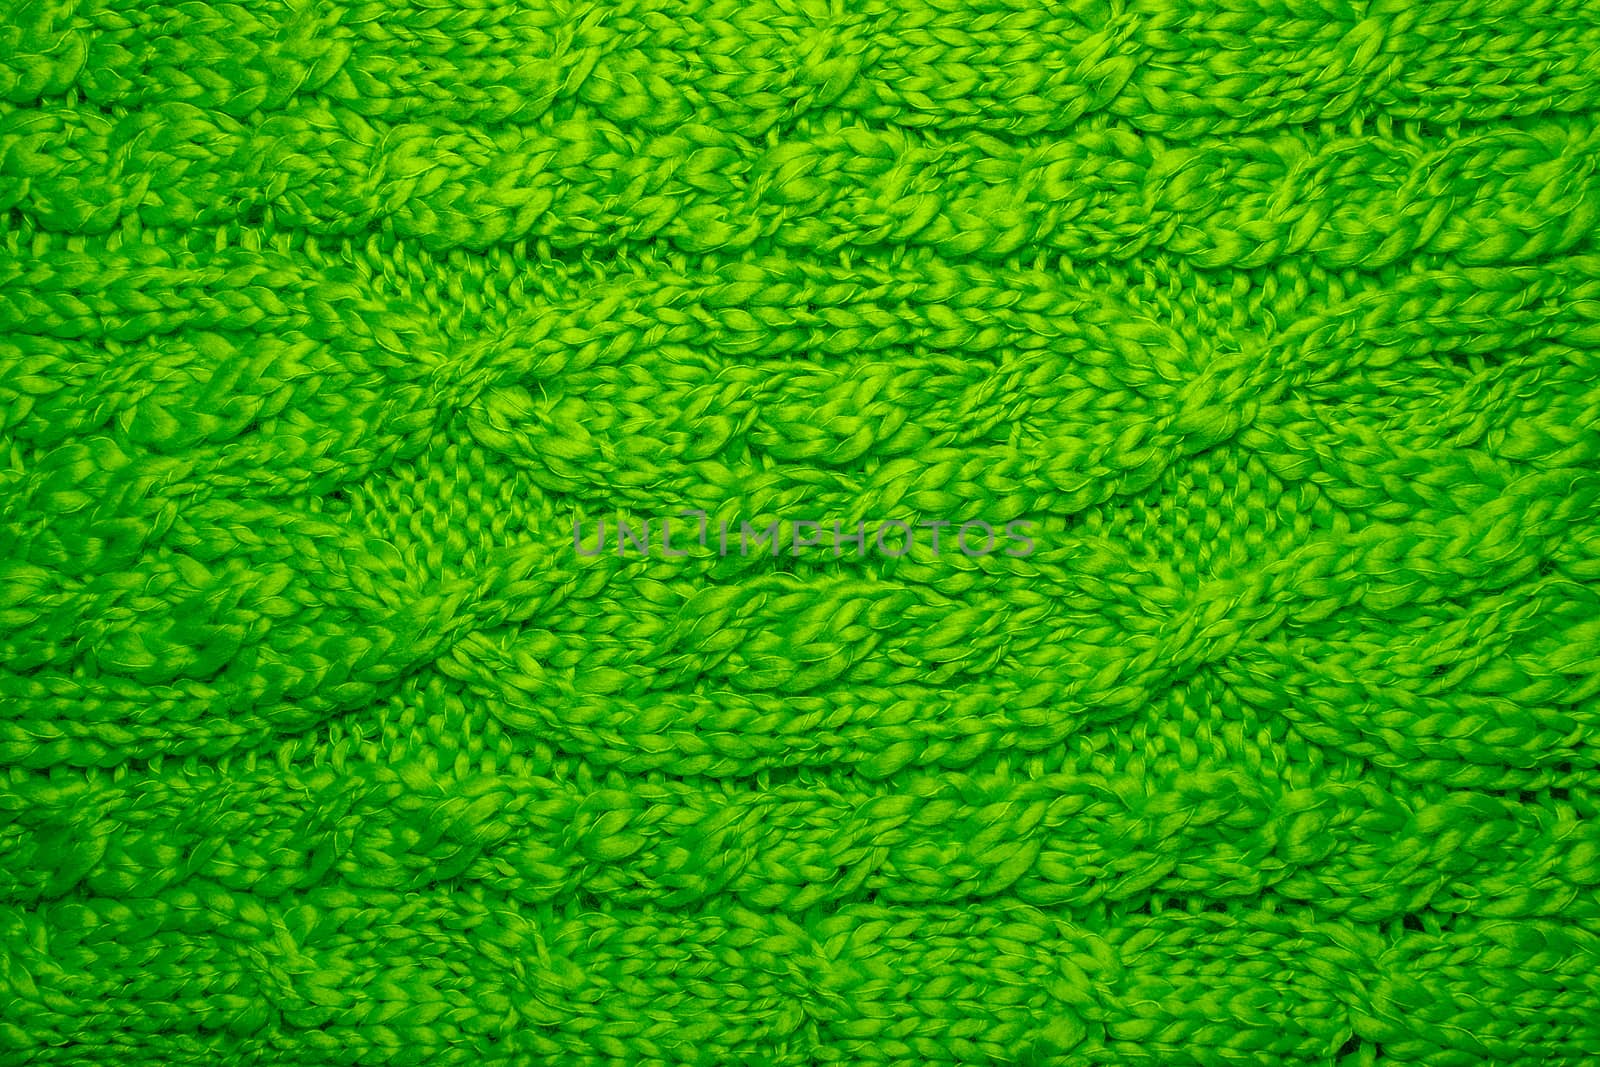 Wool sweater or scarf texture close up. Knitted jersey background with a relief pattern. Braids in machine knitting pattern. Wool hand-knitted or machine knitting pattern. Closeup Fabric Background